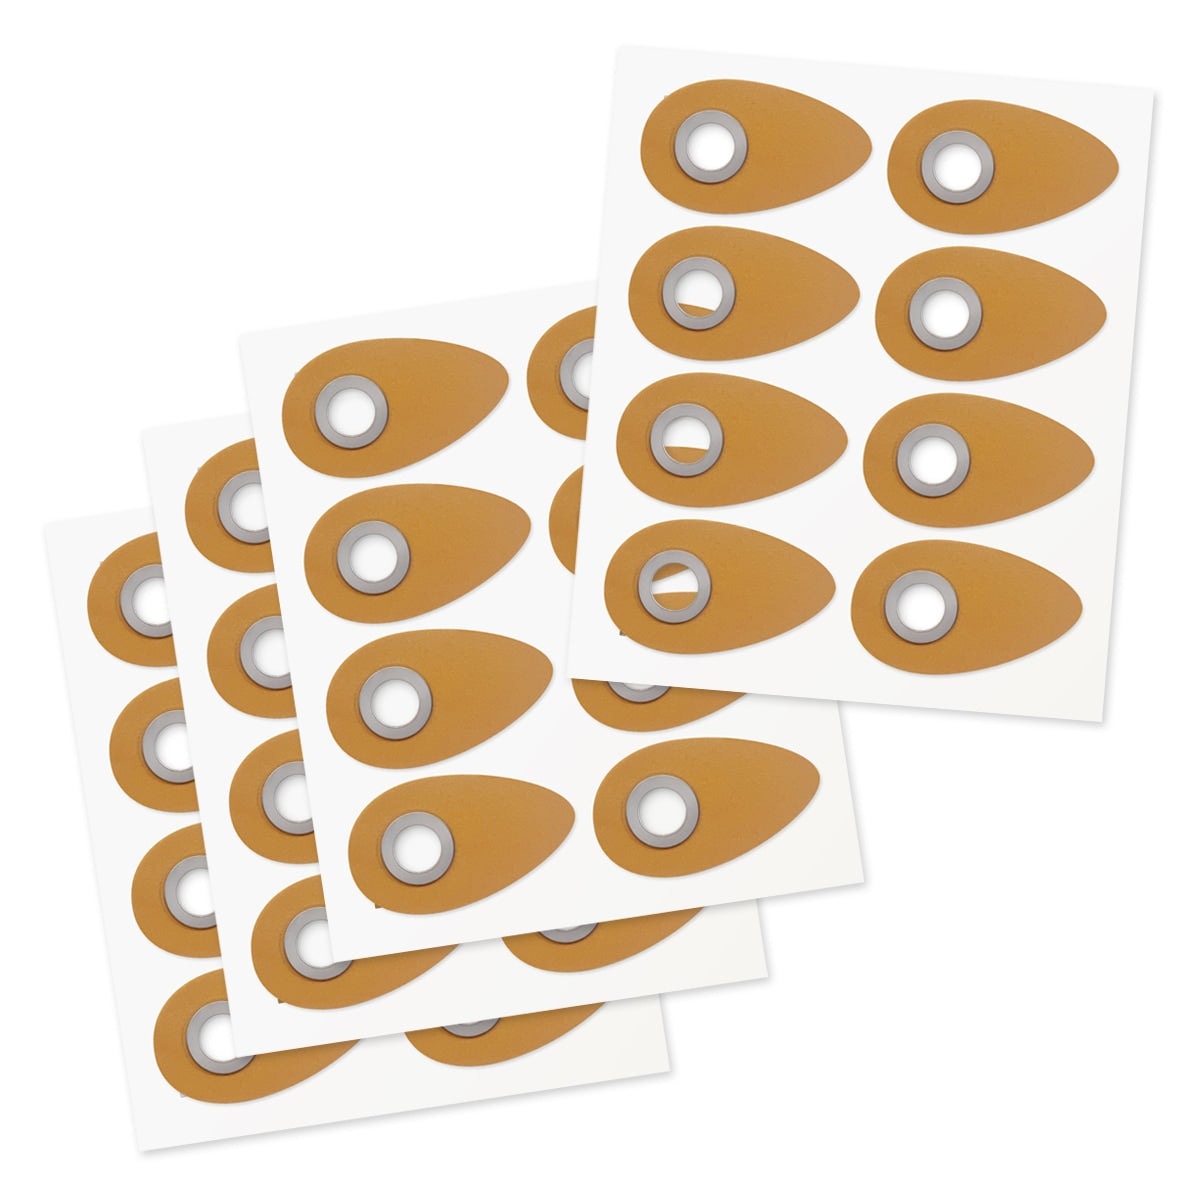 Bleep Eclipse Halos Adhesive Patches for Eclipse CPAP/BiPAP Masks